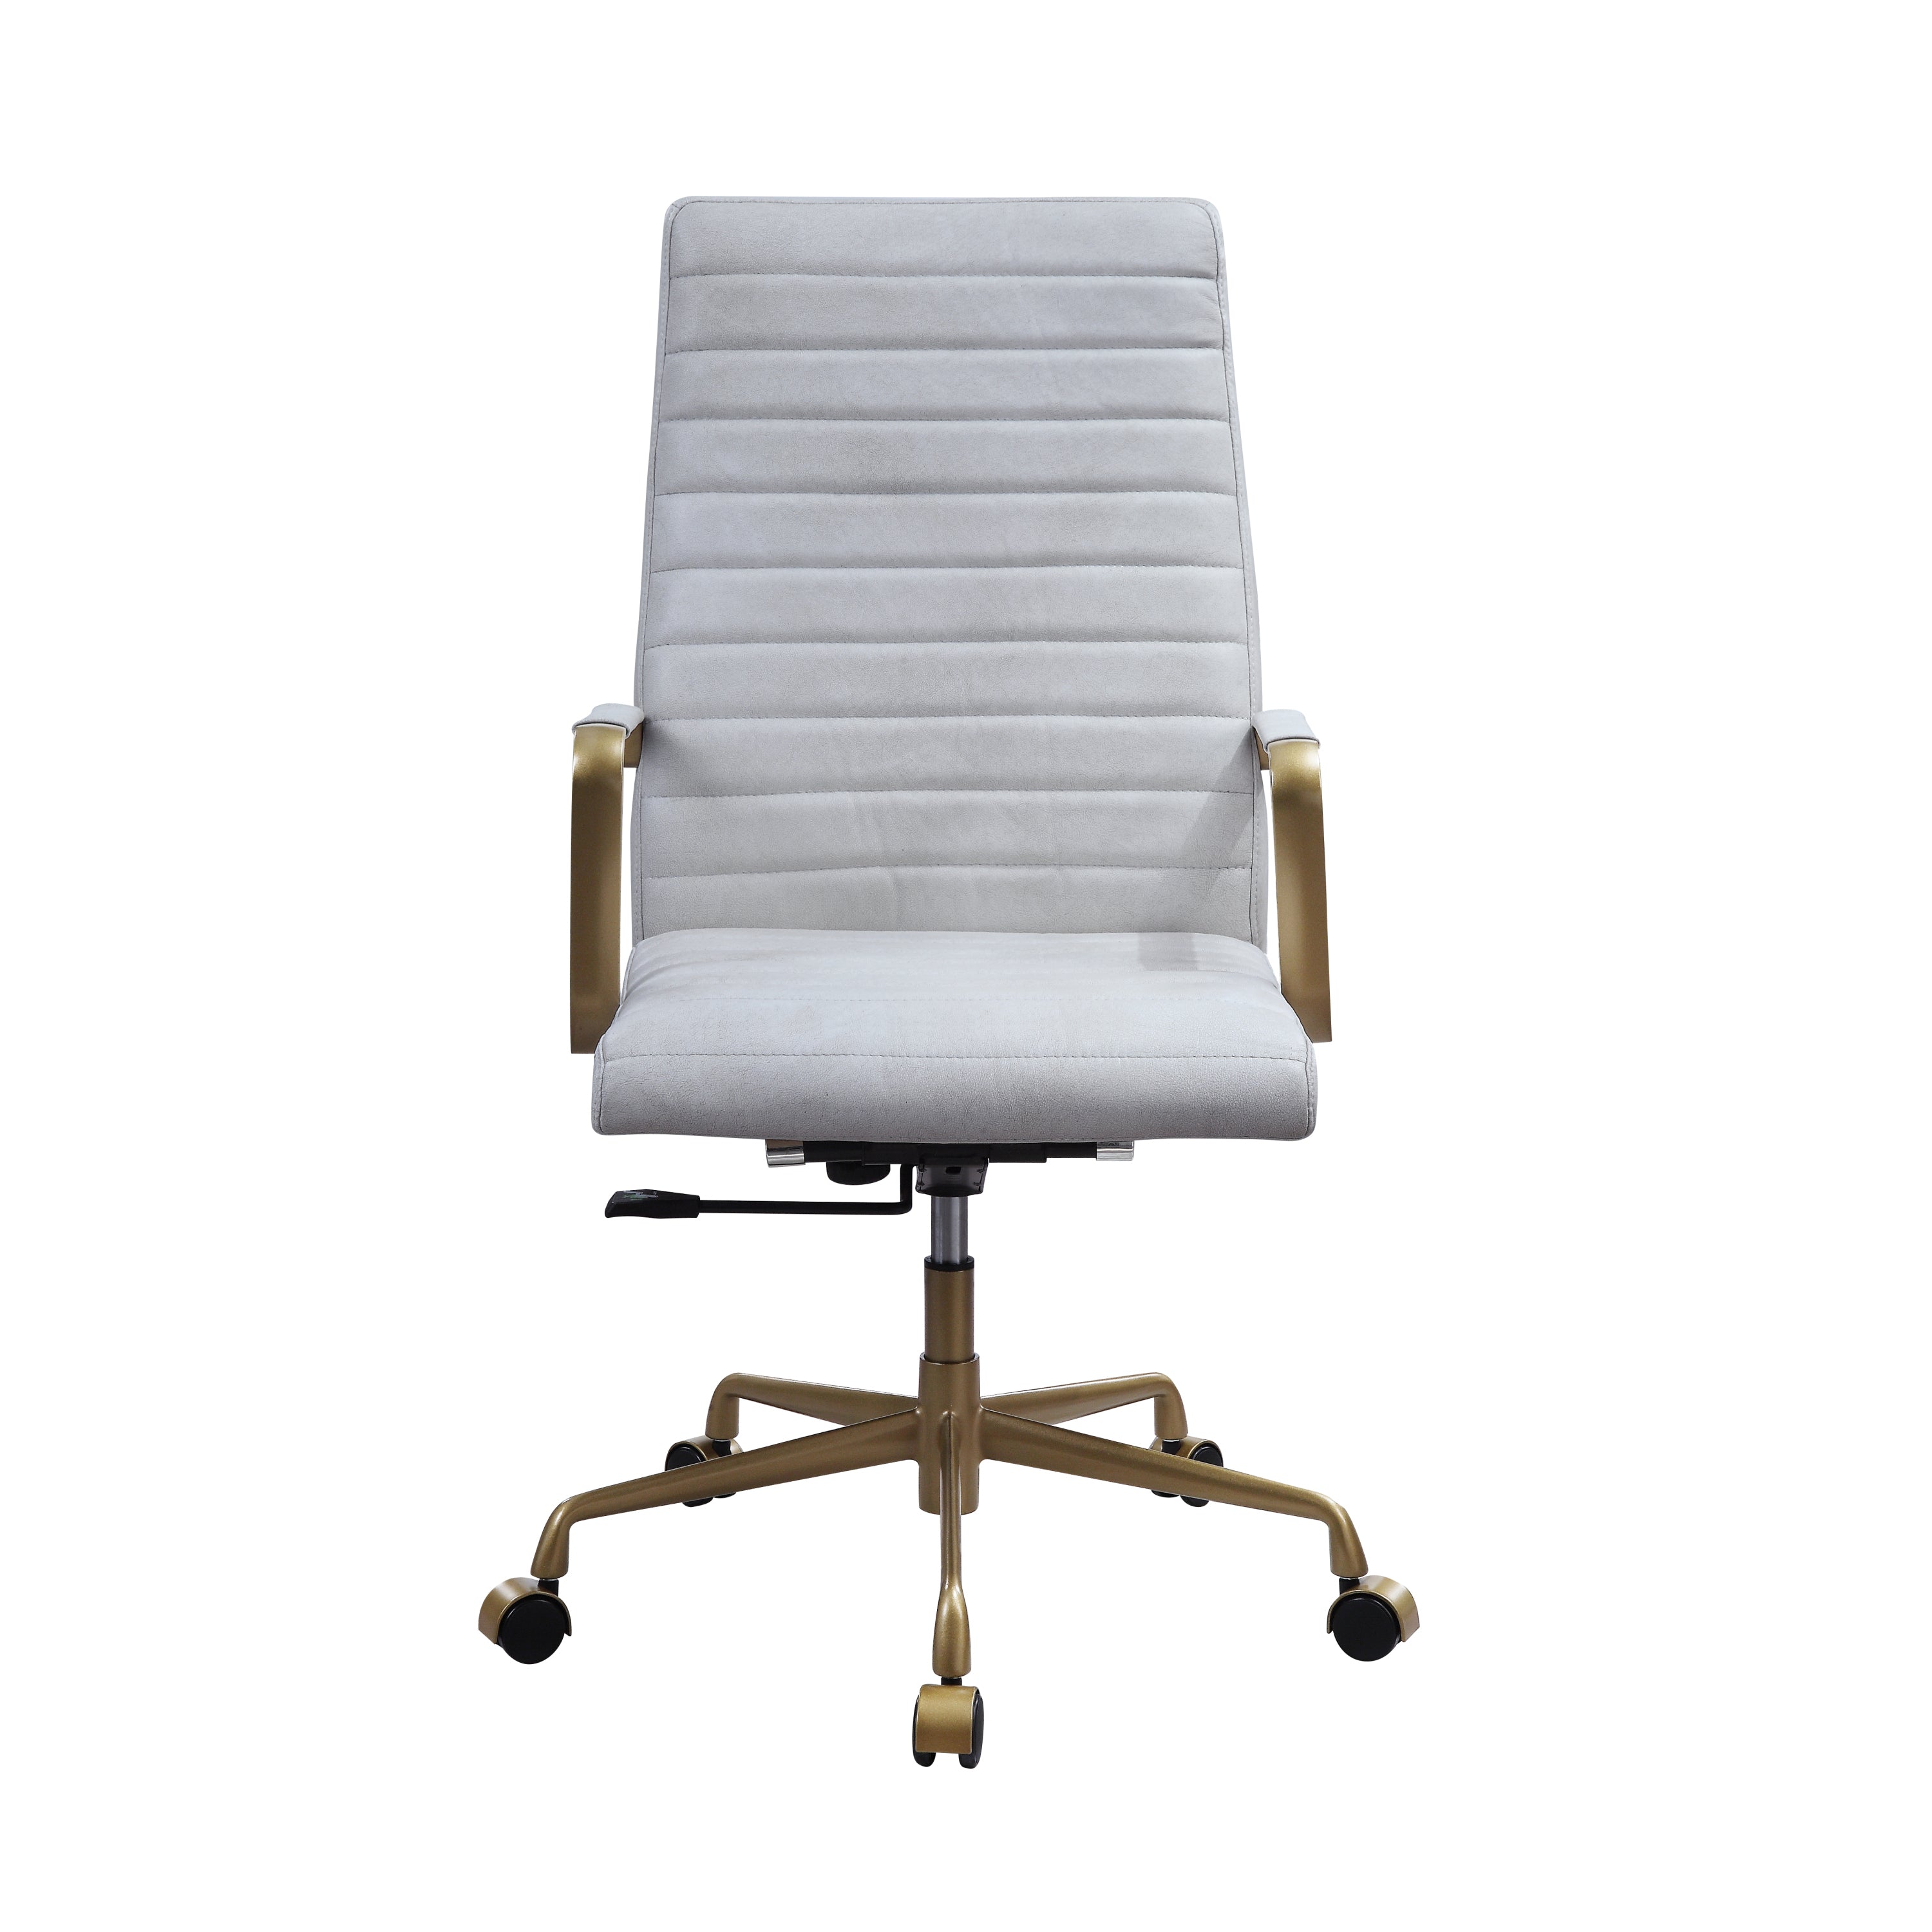 Vintage Office Chair Top Grain Leather - White